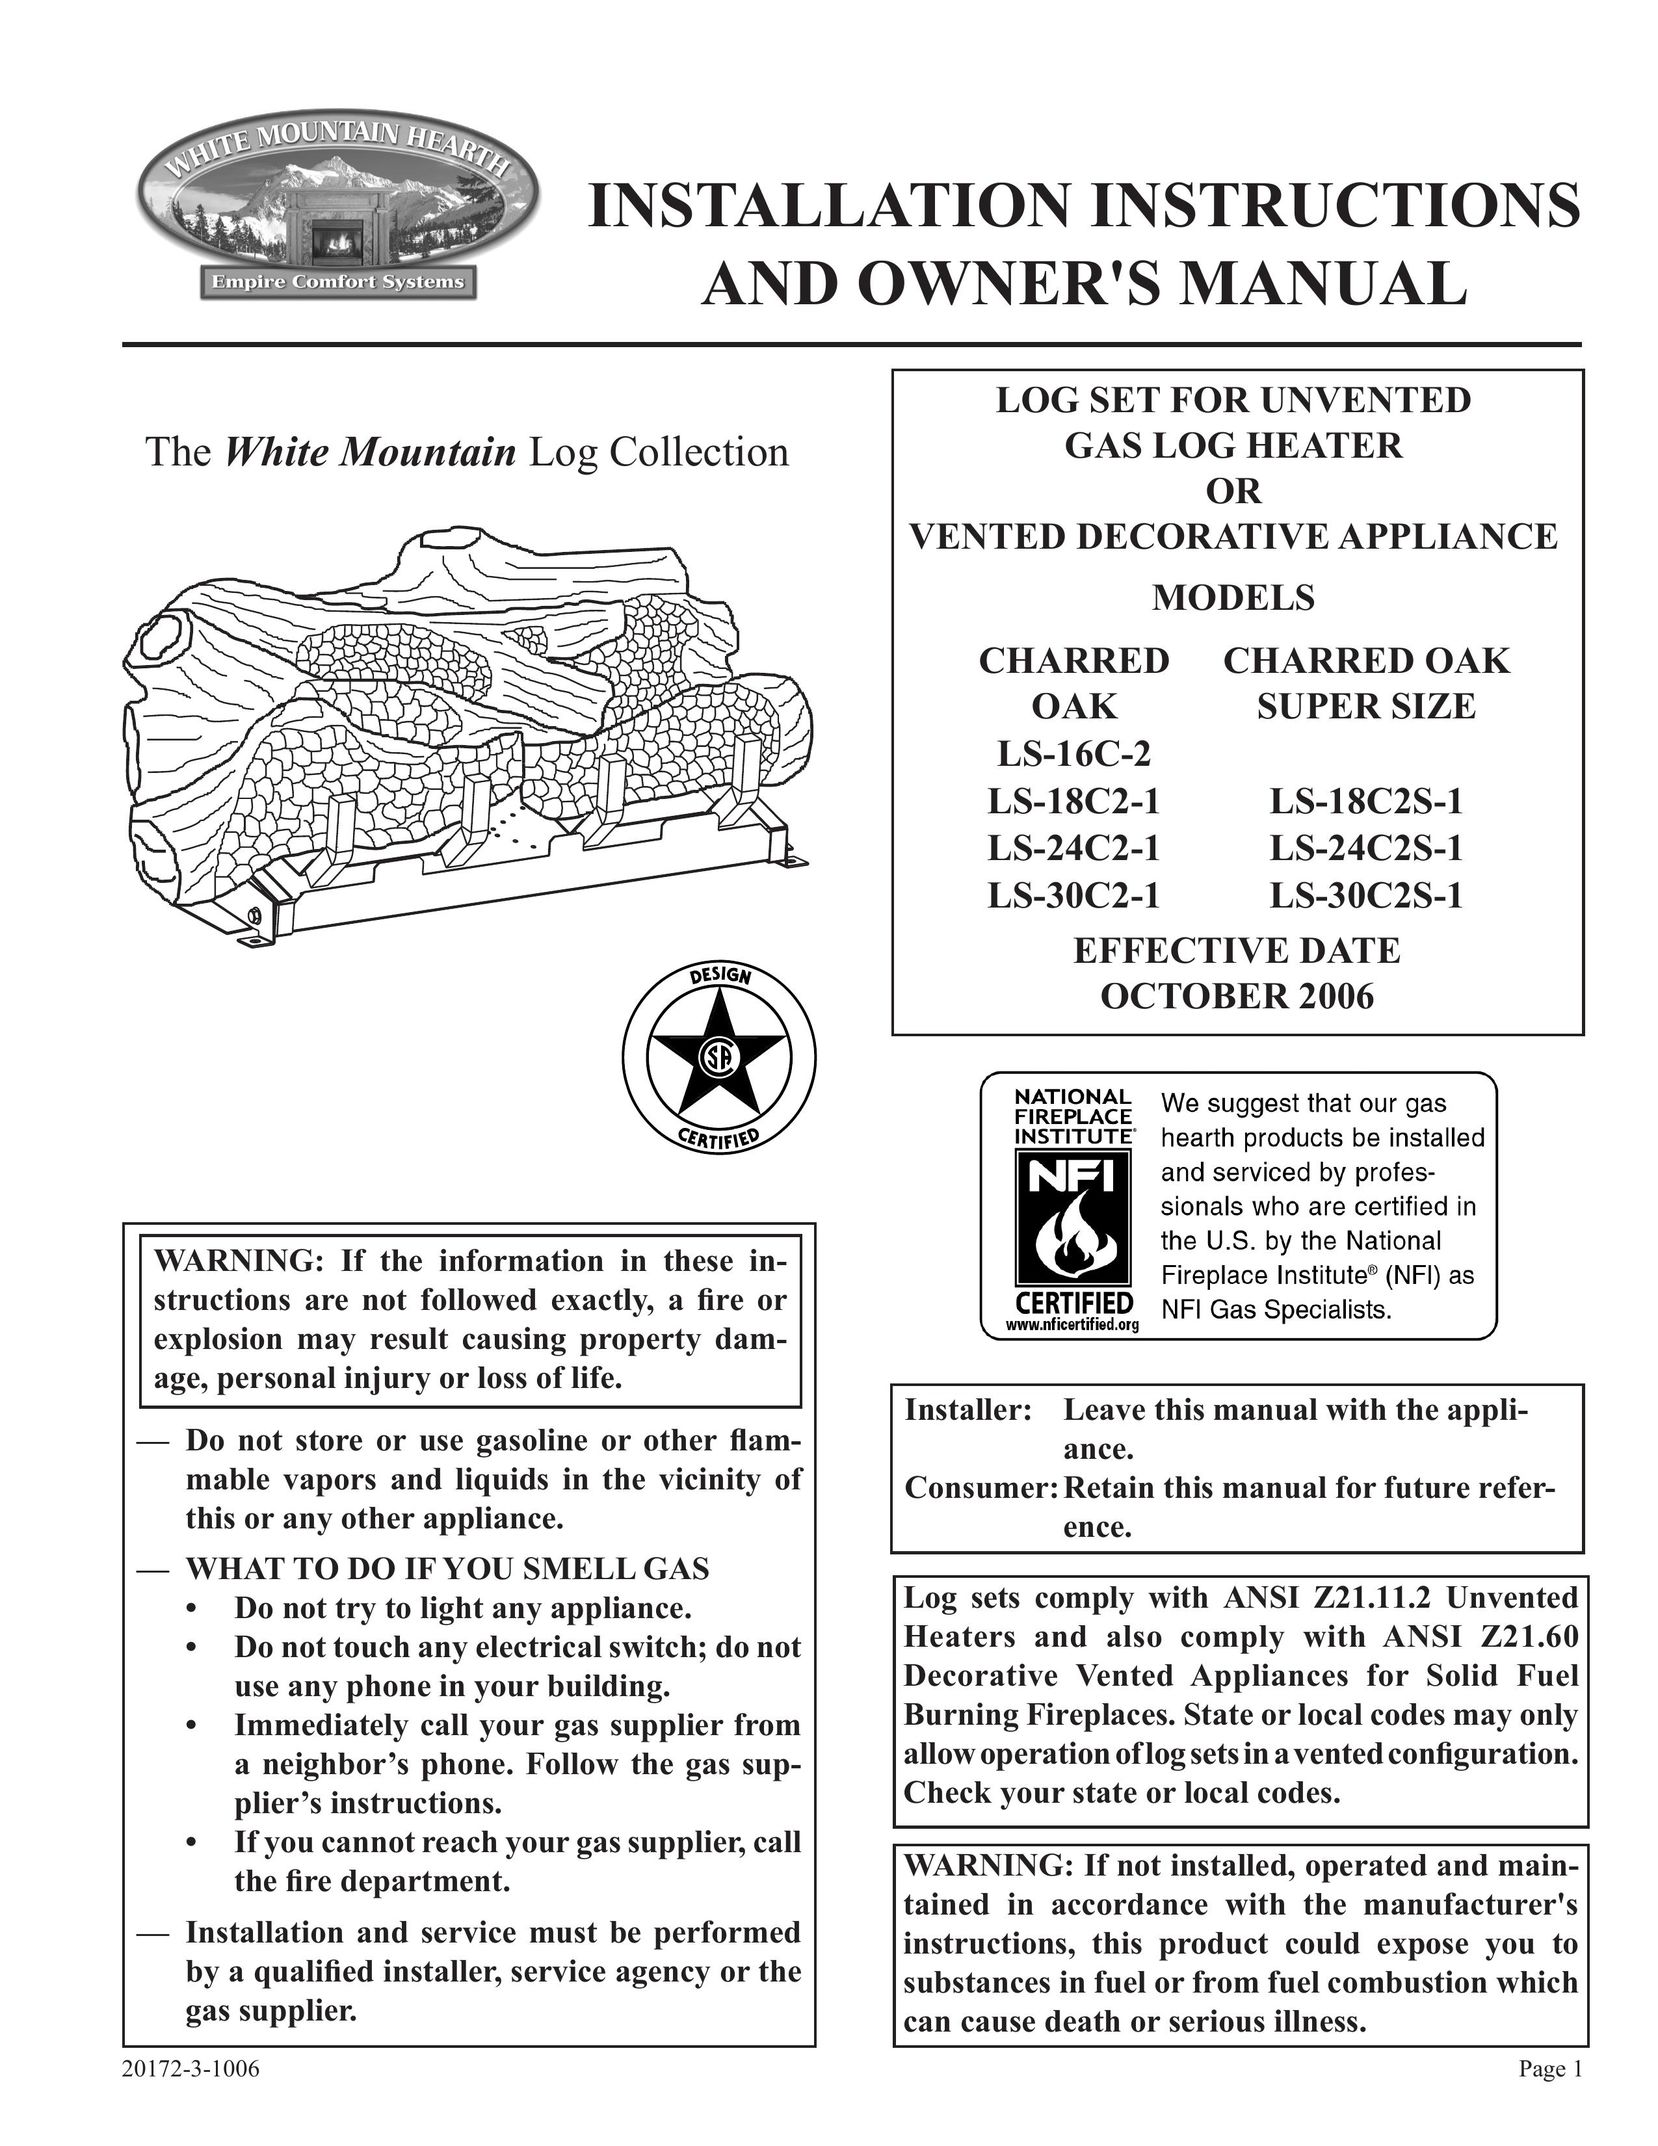 Empire Comfort Systems LS-30C2S-1 Gas Heater User Manual